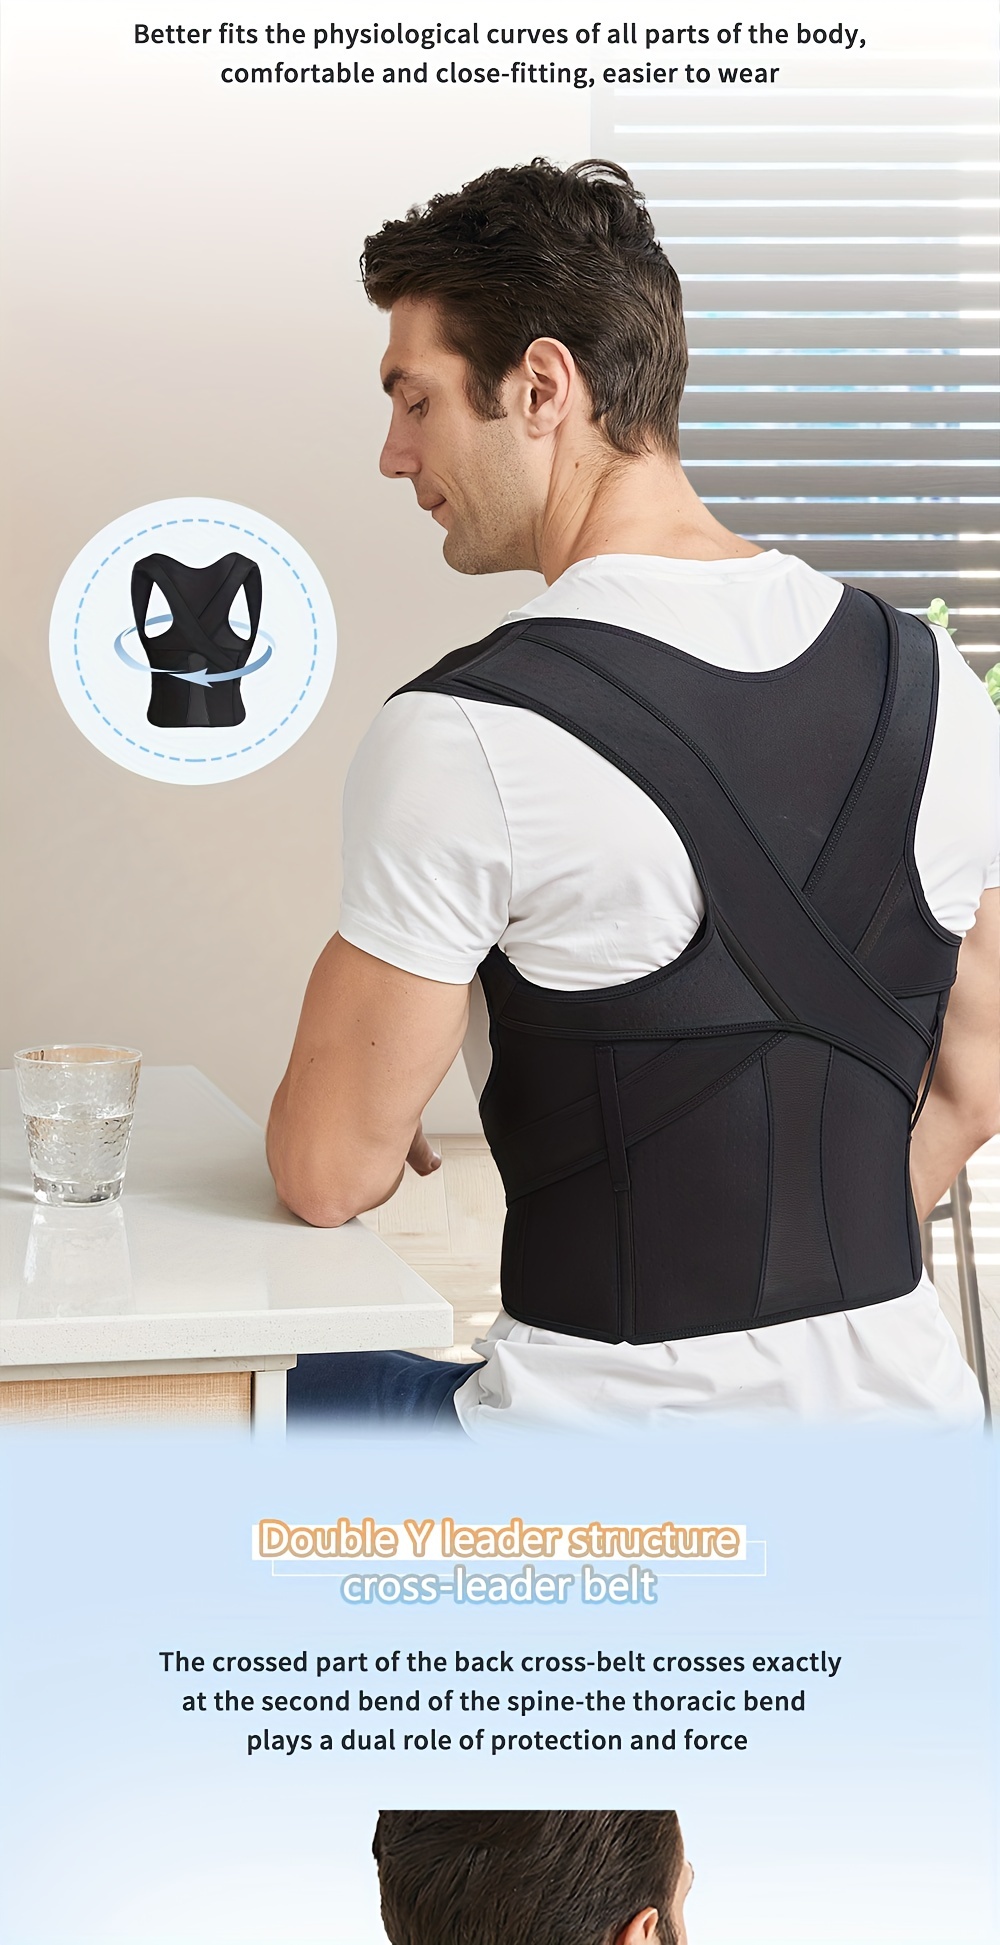 Vicorrect Posture Corrector for Women and Men, Adjustable Upper Back Brace  for Clavicle Support, Pain Relief from Neck, Shoulder, Upper Back, S-M